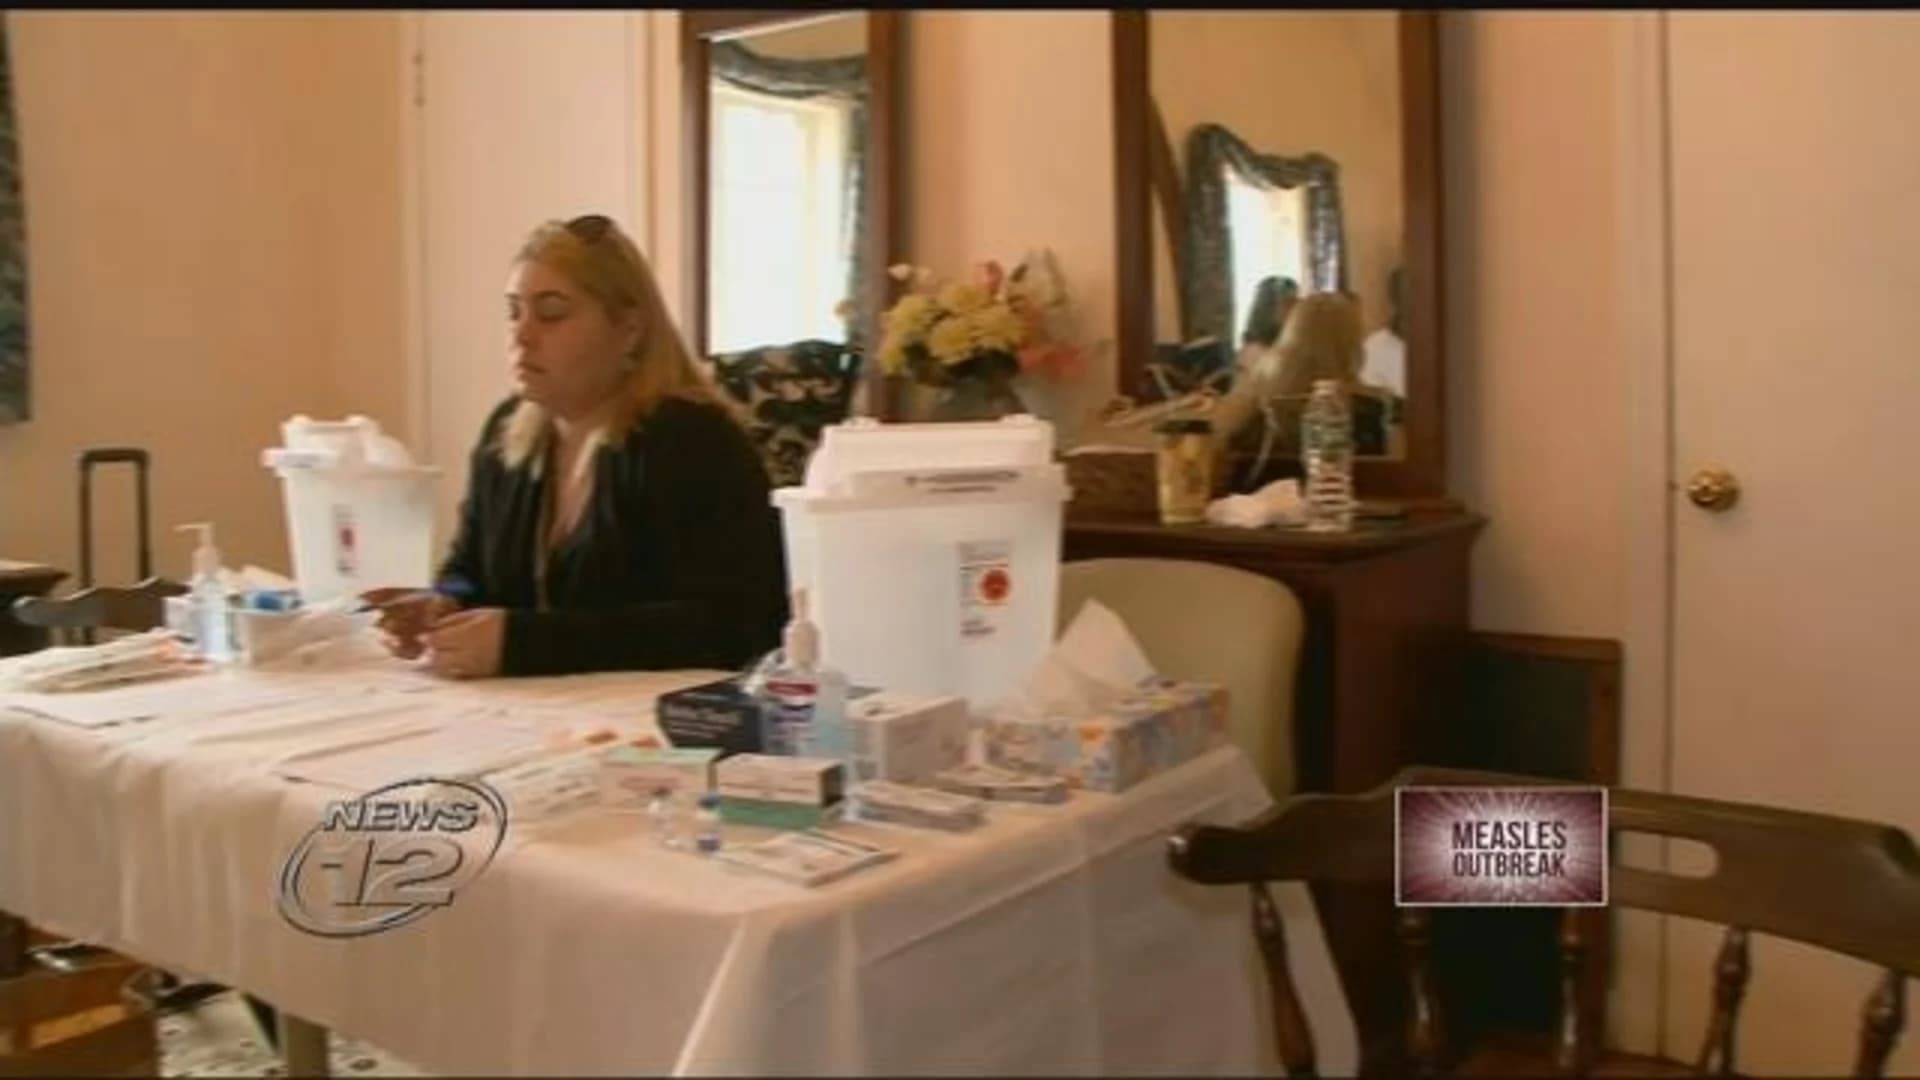 Free vaccine clinic held in Suffern church amid measles outbreak